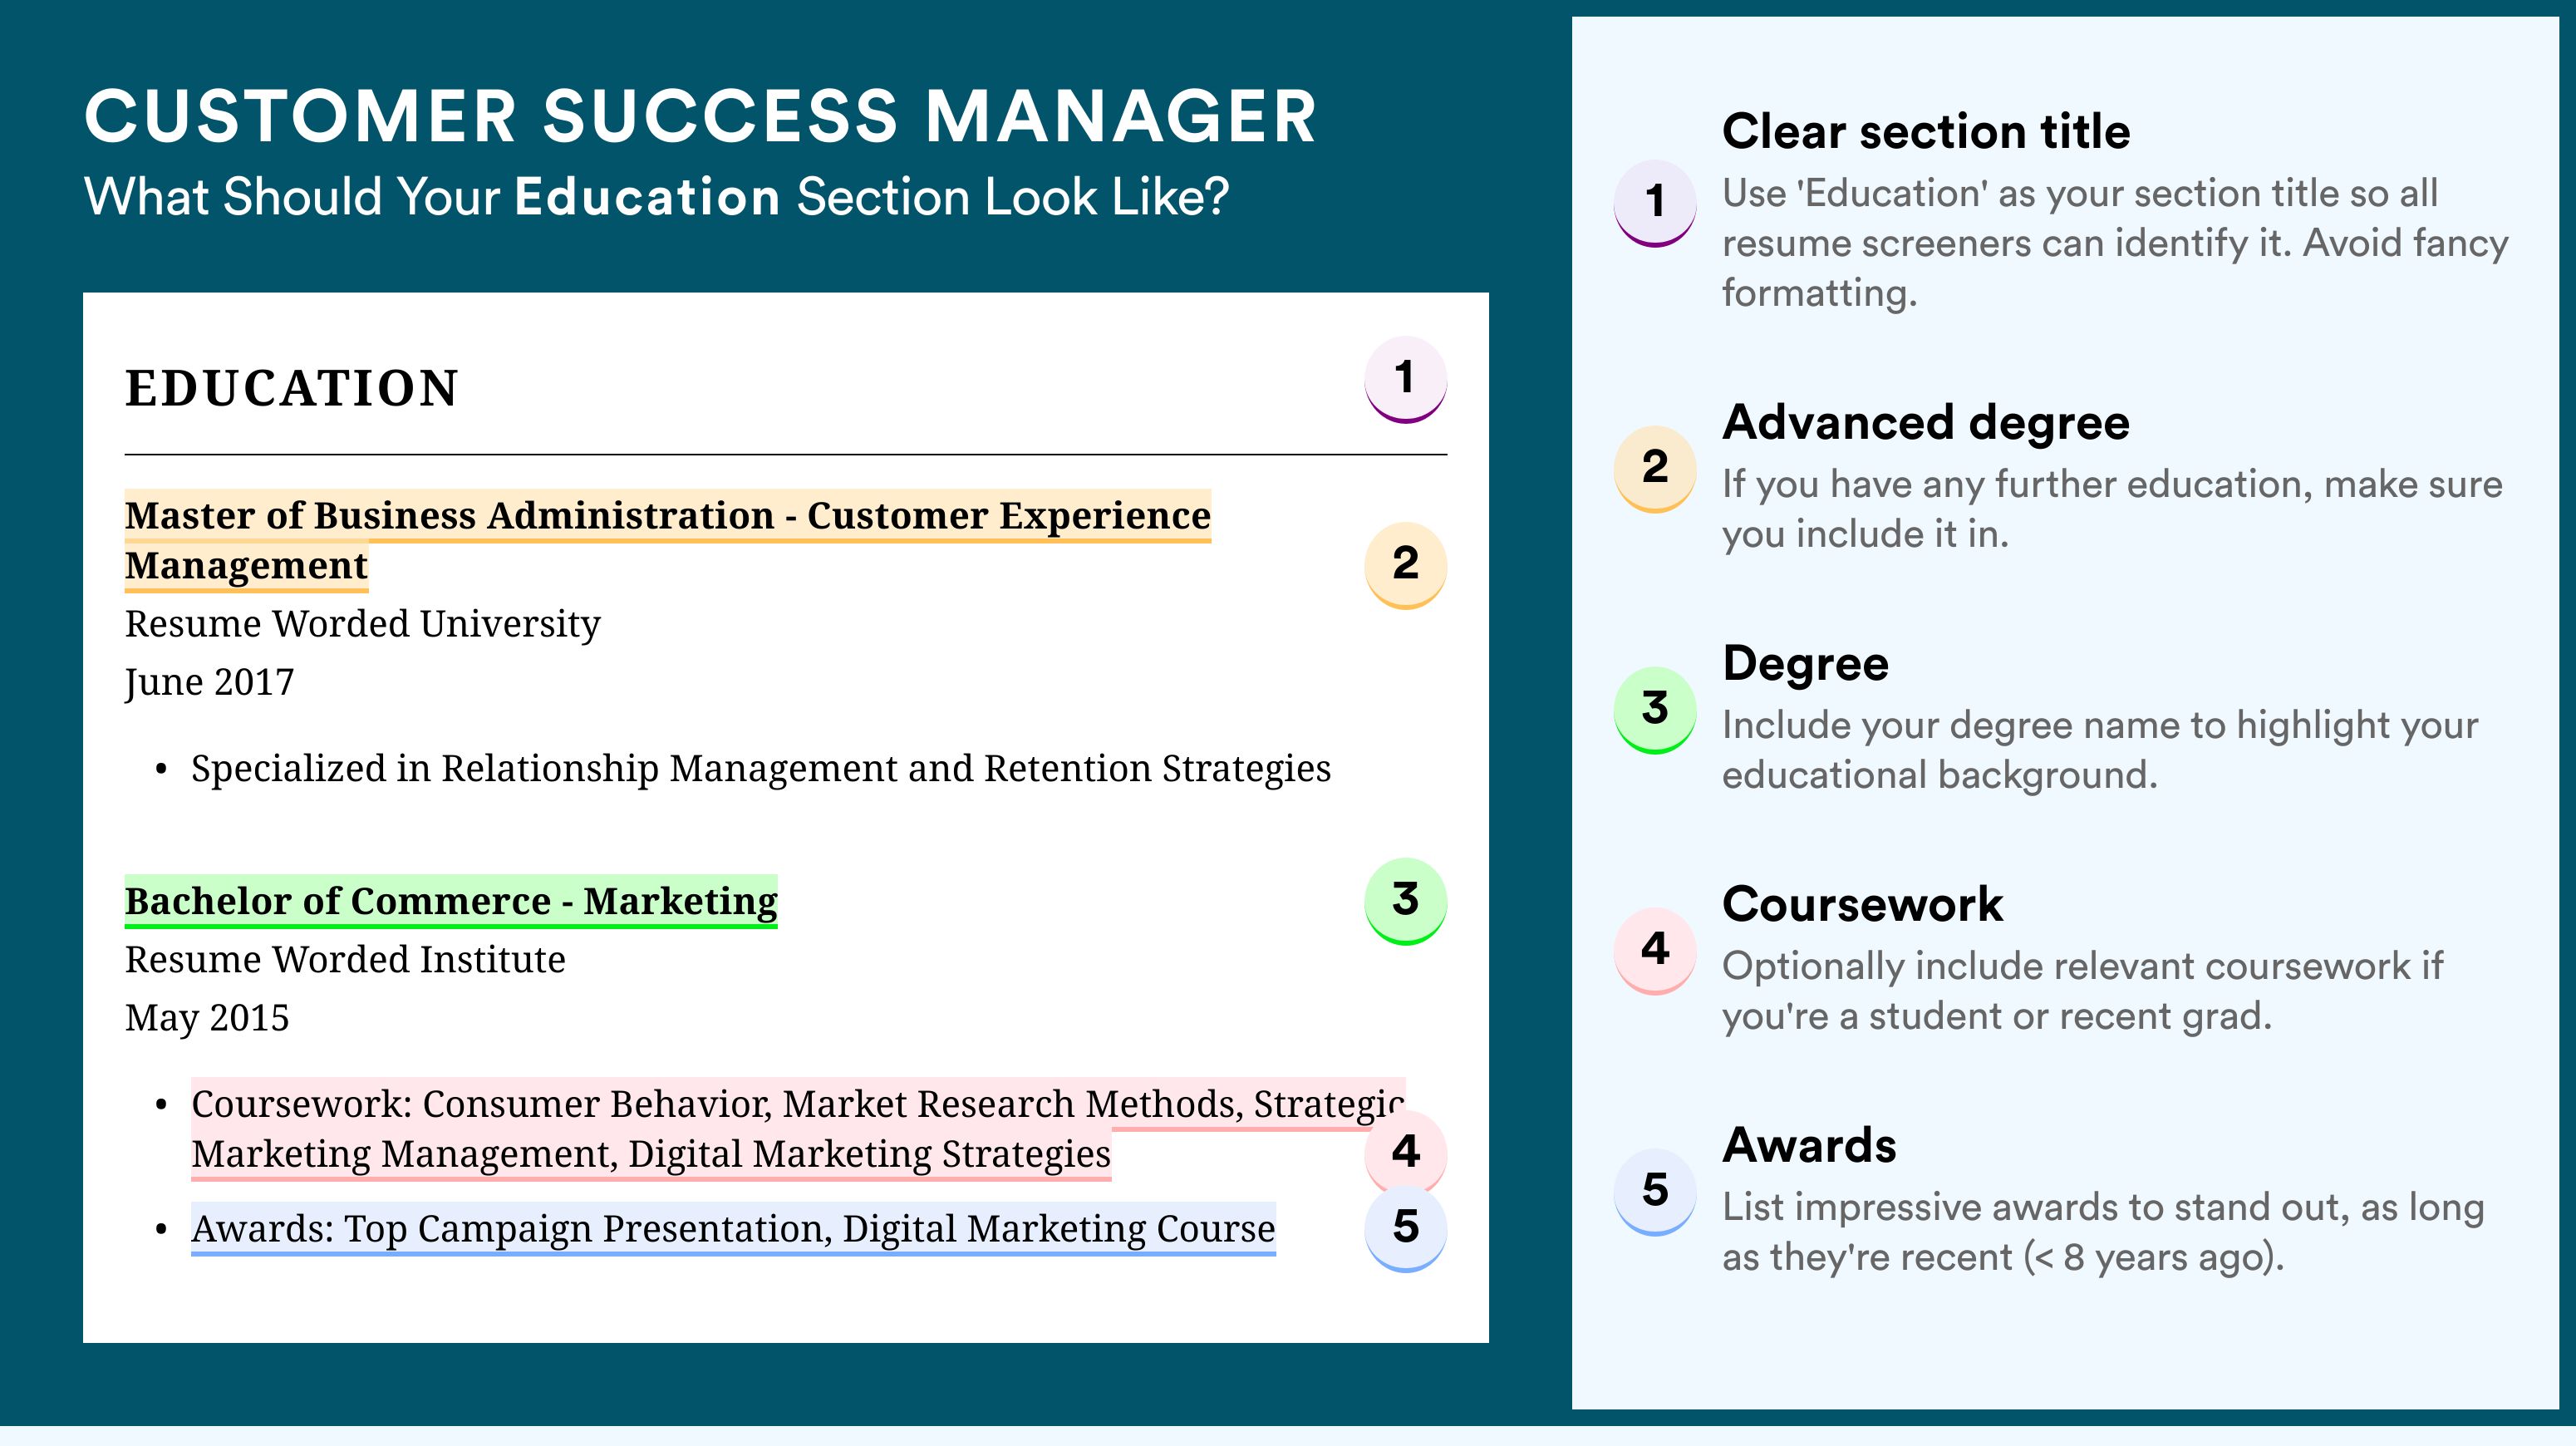 How To Write An Education Section - Customer Success Manager Roles